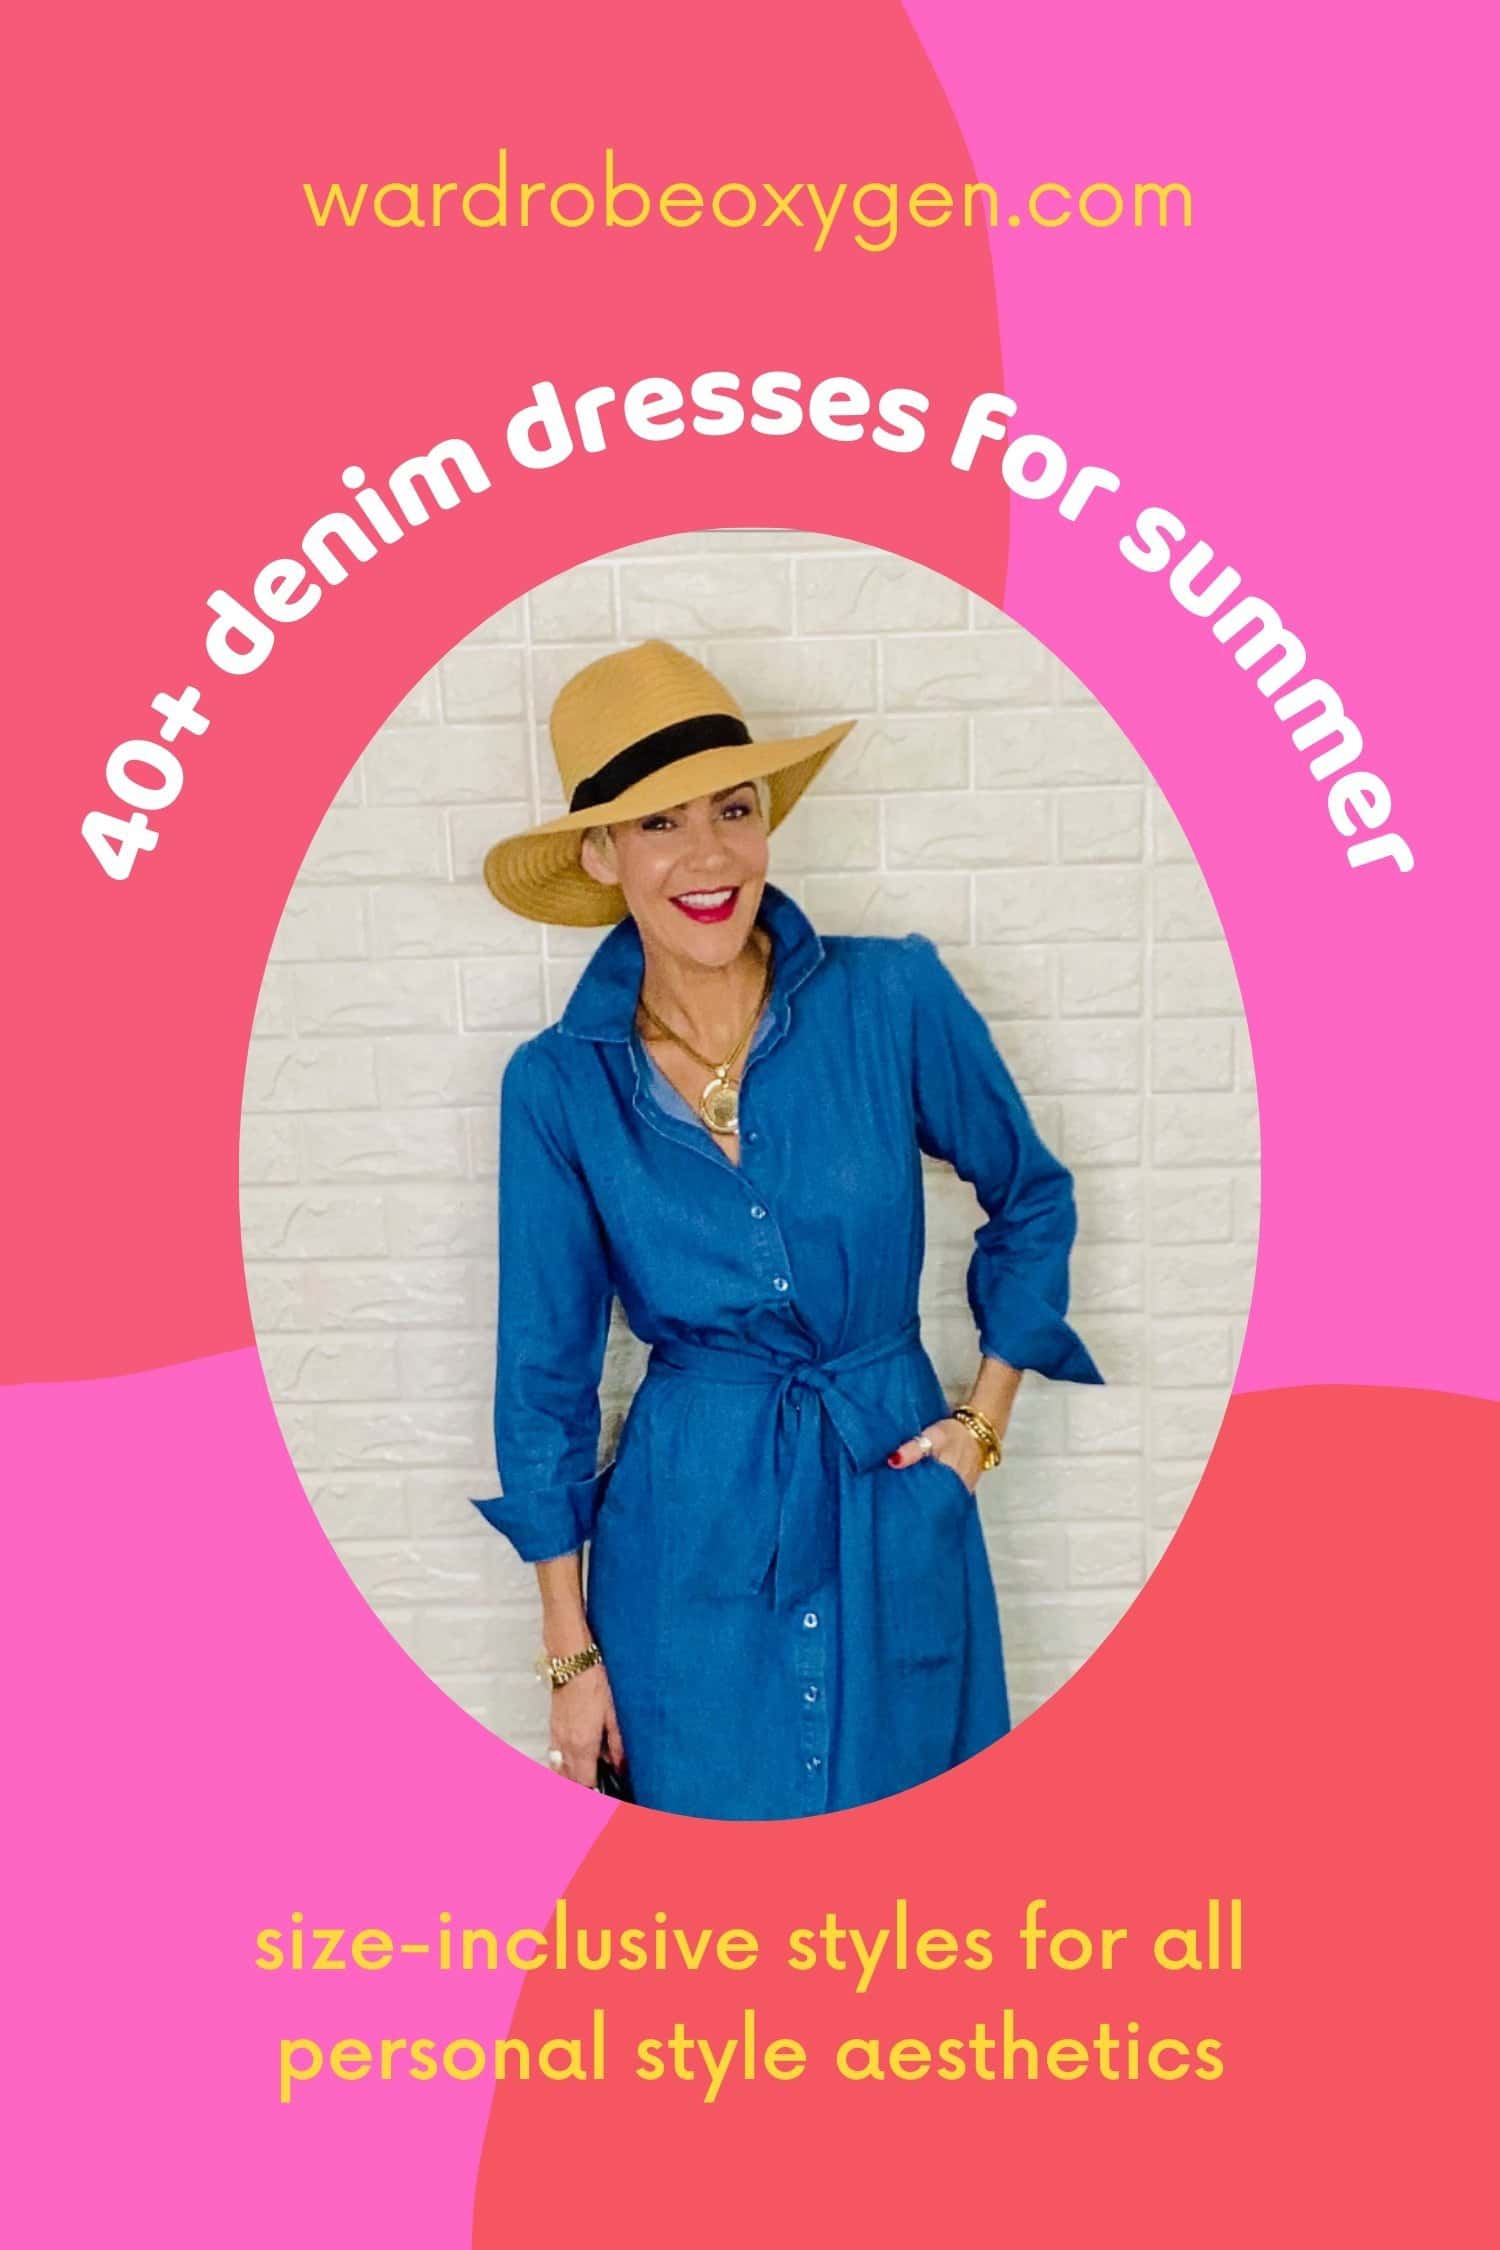 40+ denim dresses for summer curated by Alison Gary of Wardrobe Oxygen for every size and personal taste.